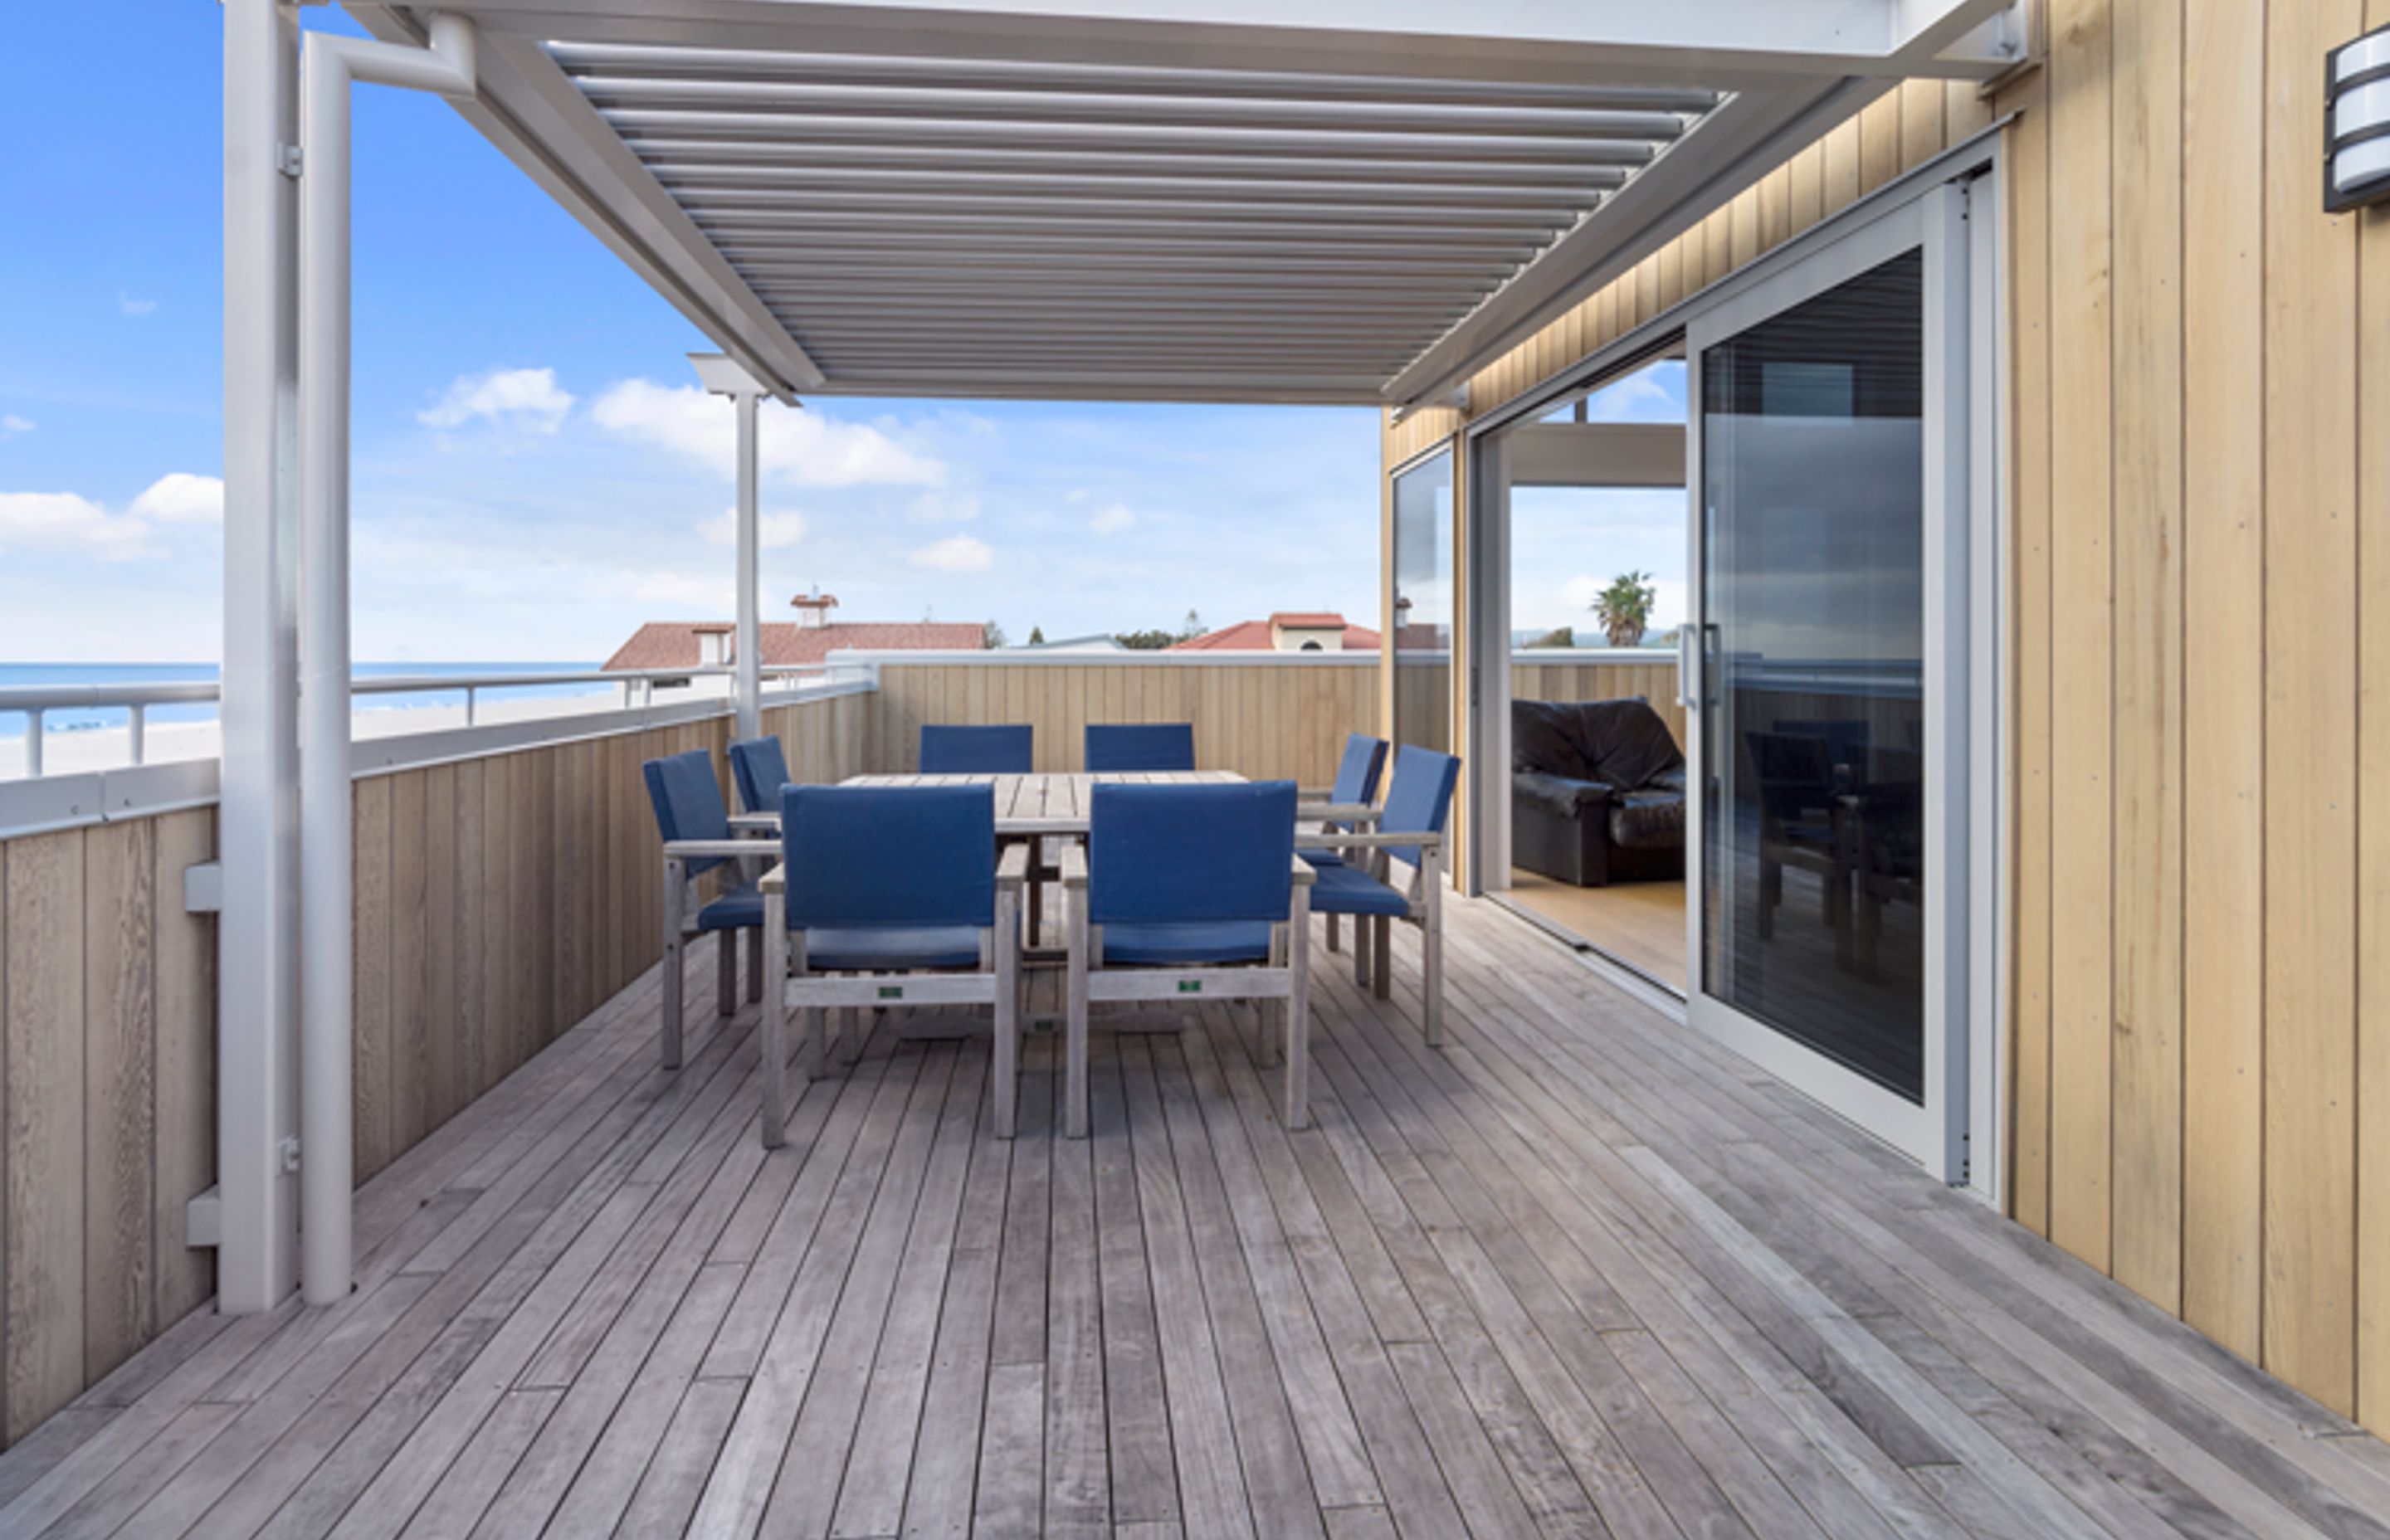 The Glass sliders connecting the living space to the outdoor decking welcome in the sea air and open onto the alfresco dining space which is under the Louvretec roof. 